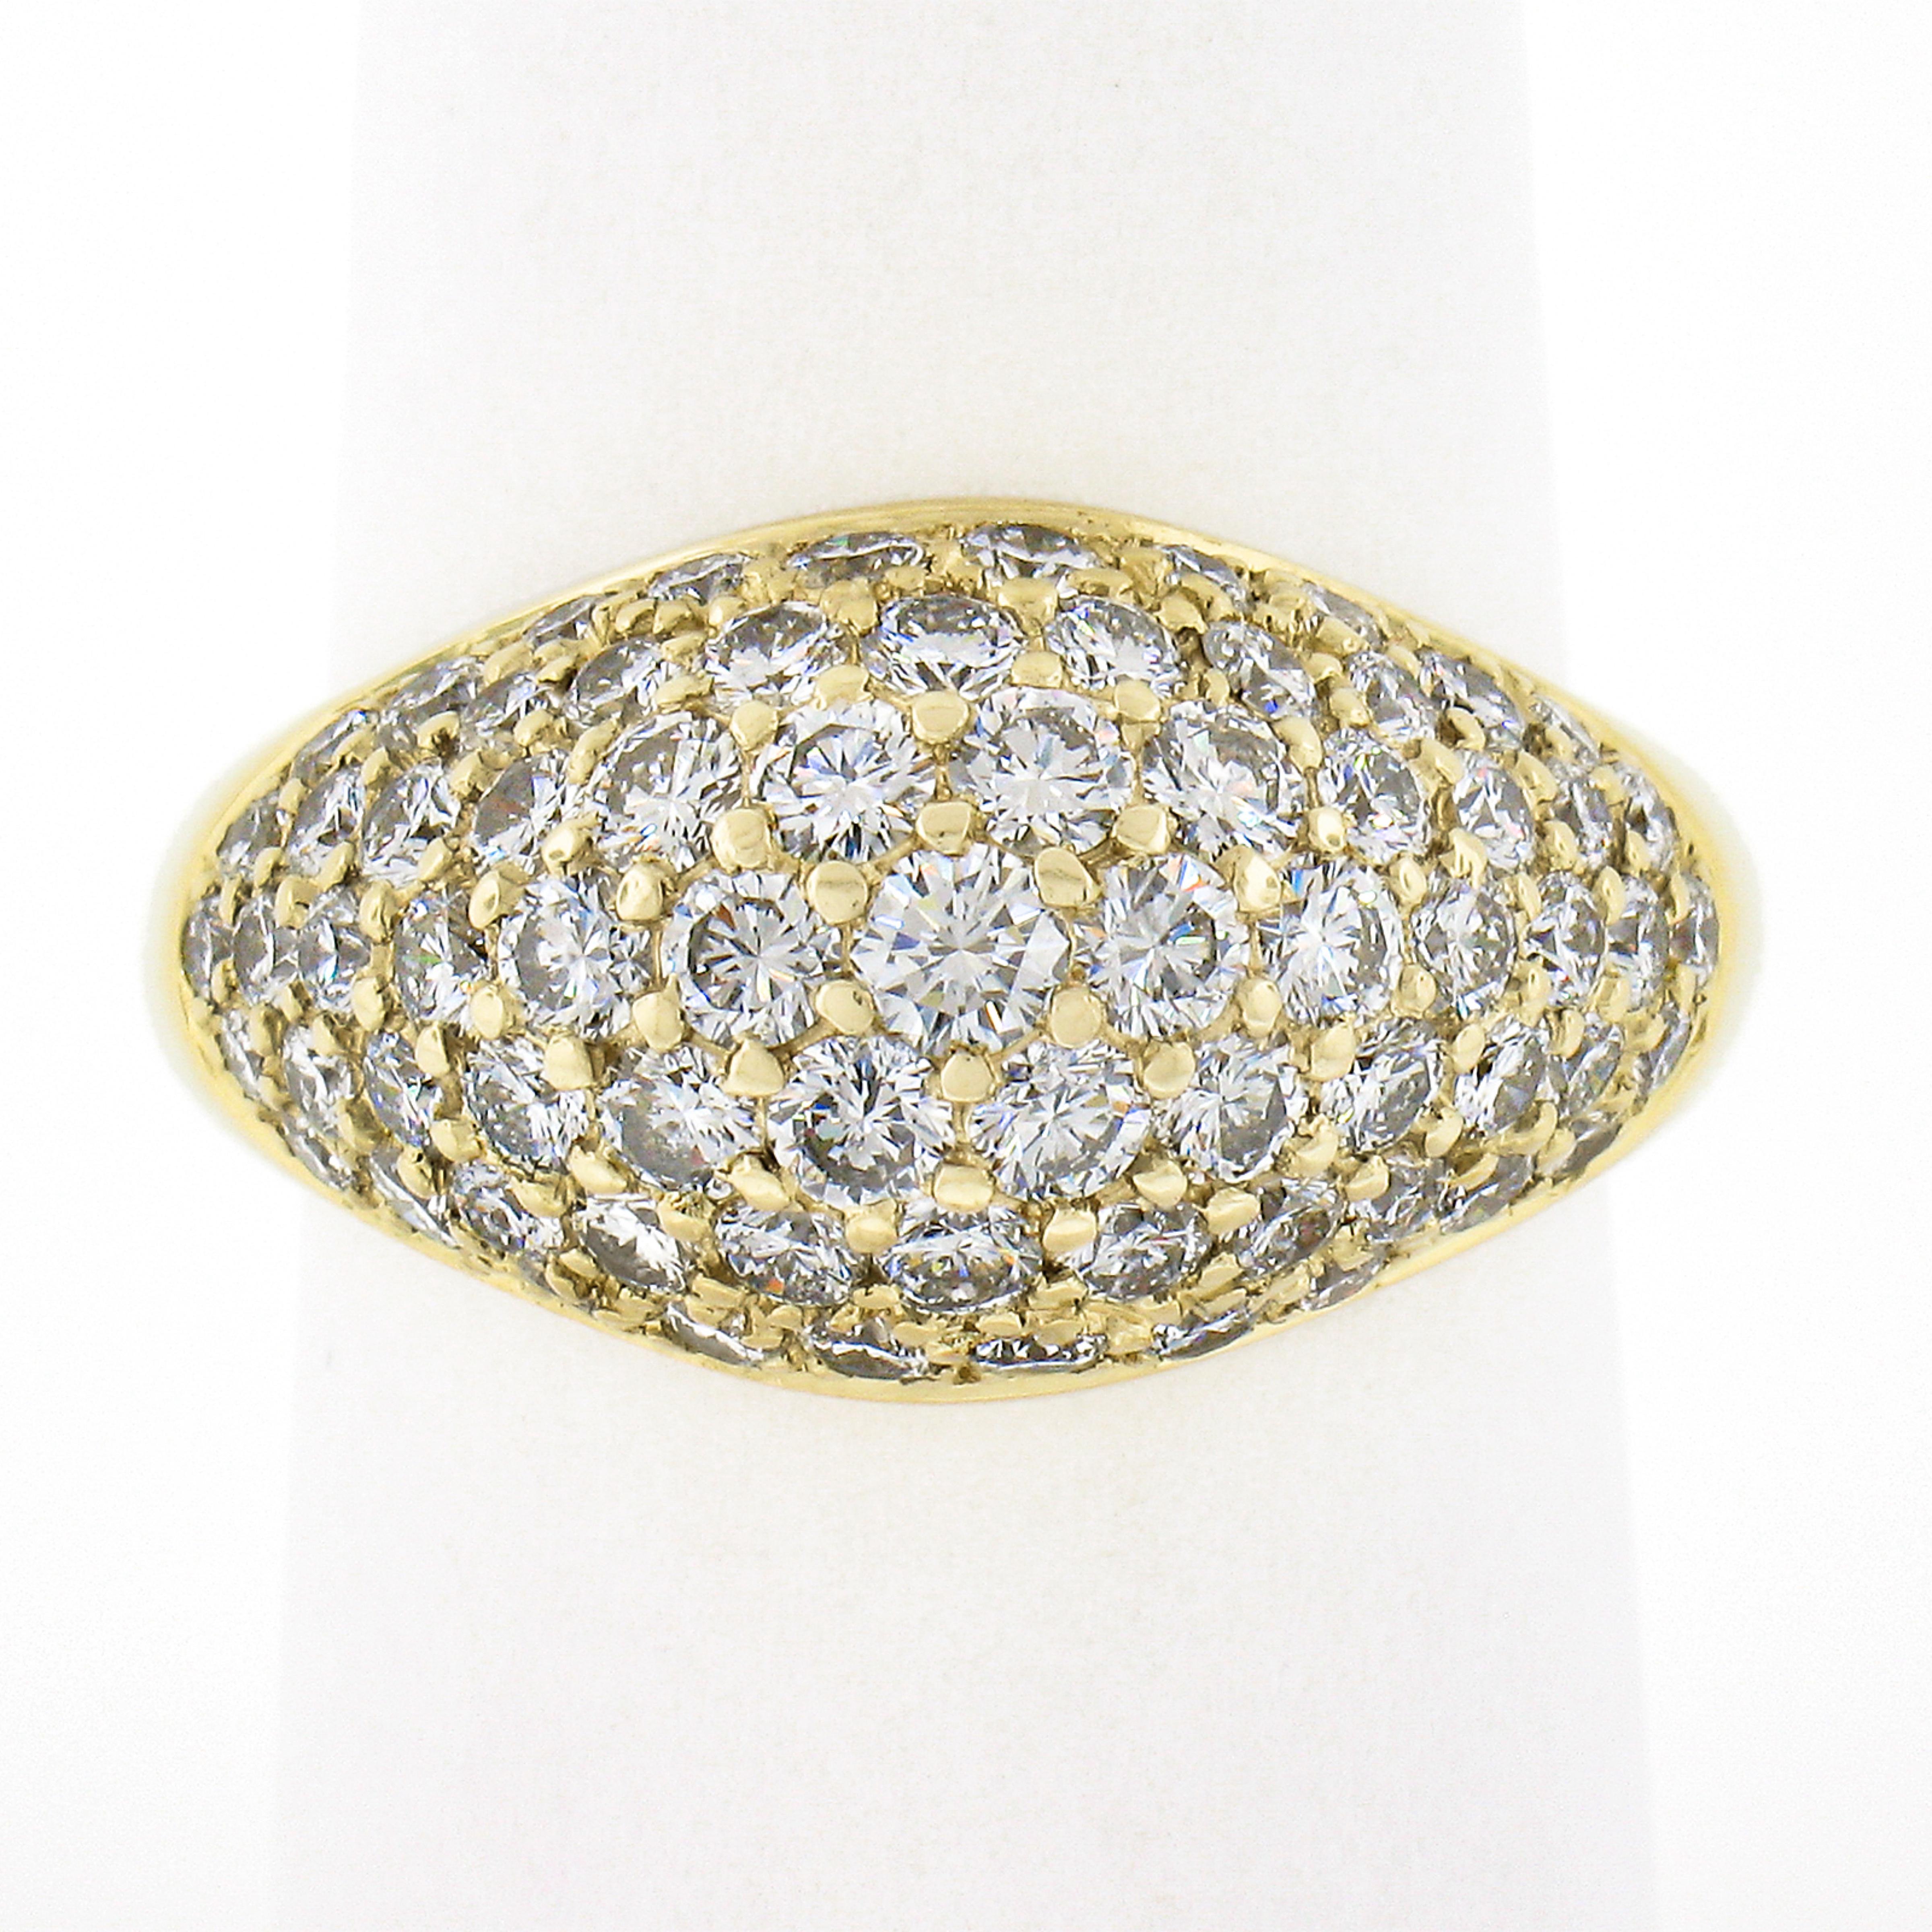 This bold and fiery diamond band ring is well crafted from solid 18k yellow gold. It is completely drenched with approximately 2.25 carats of round brilliant cut diamonds that are perfectly pave set across the dome design. These super fine quality